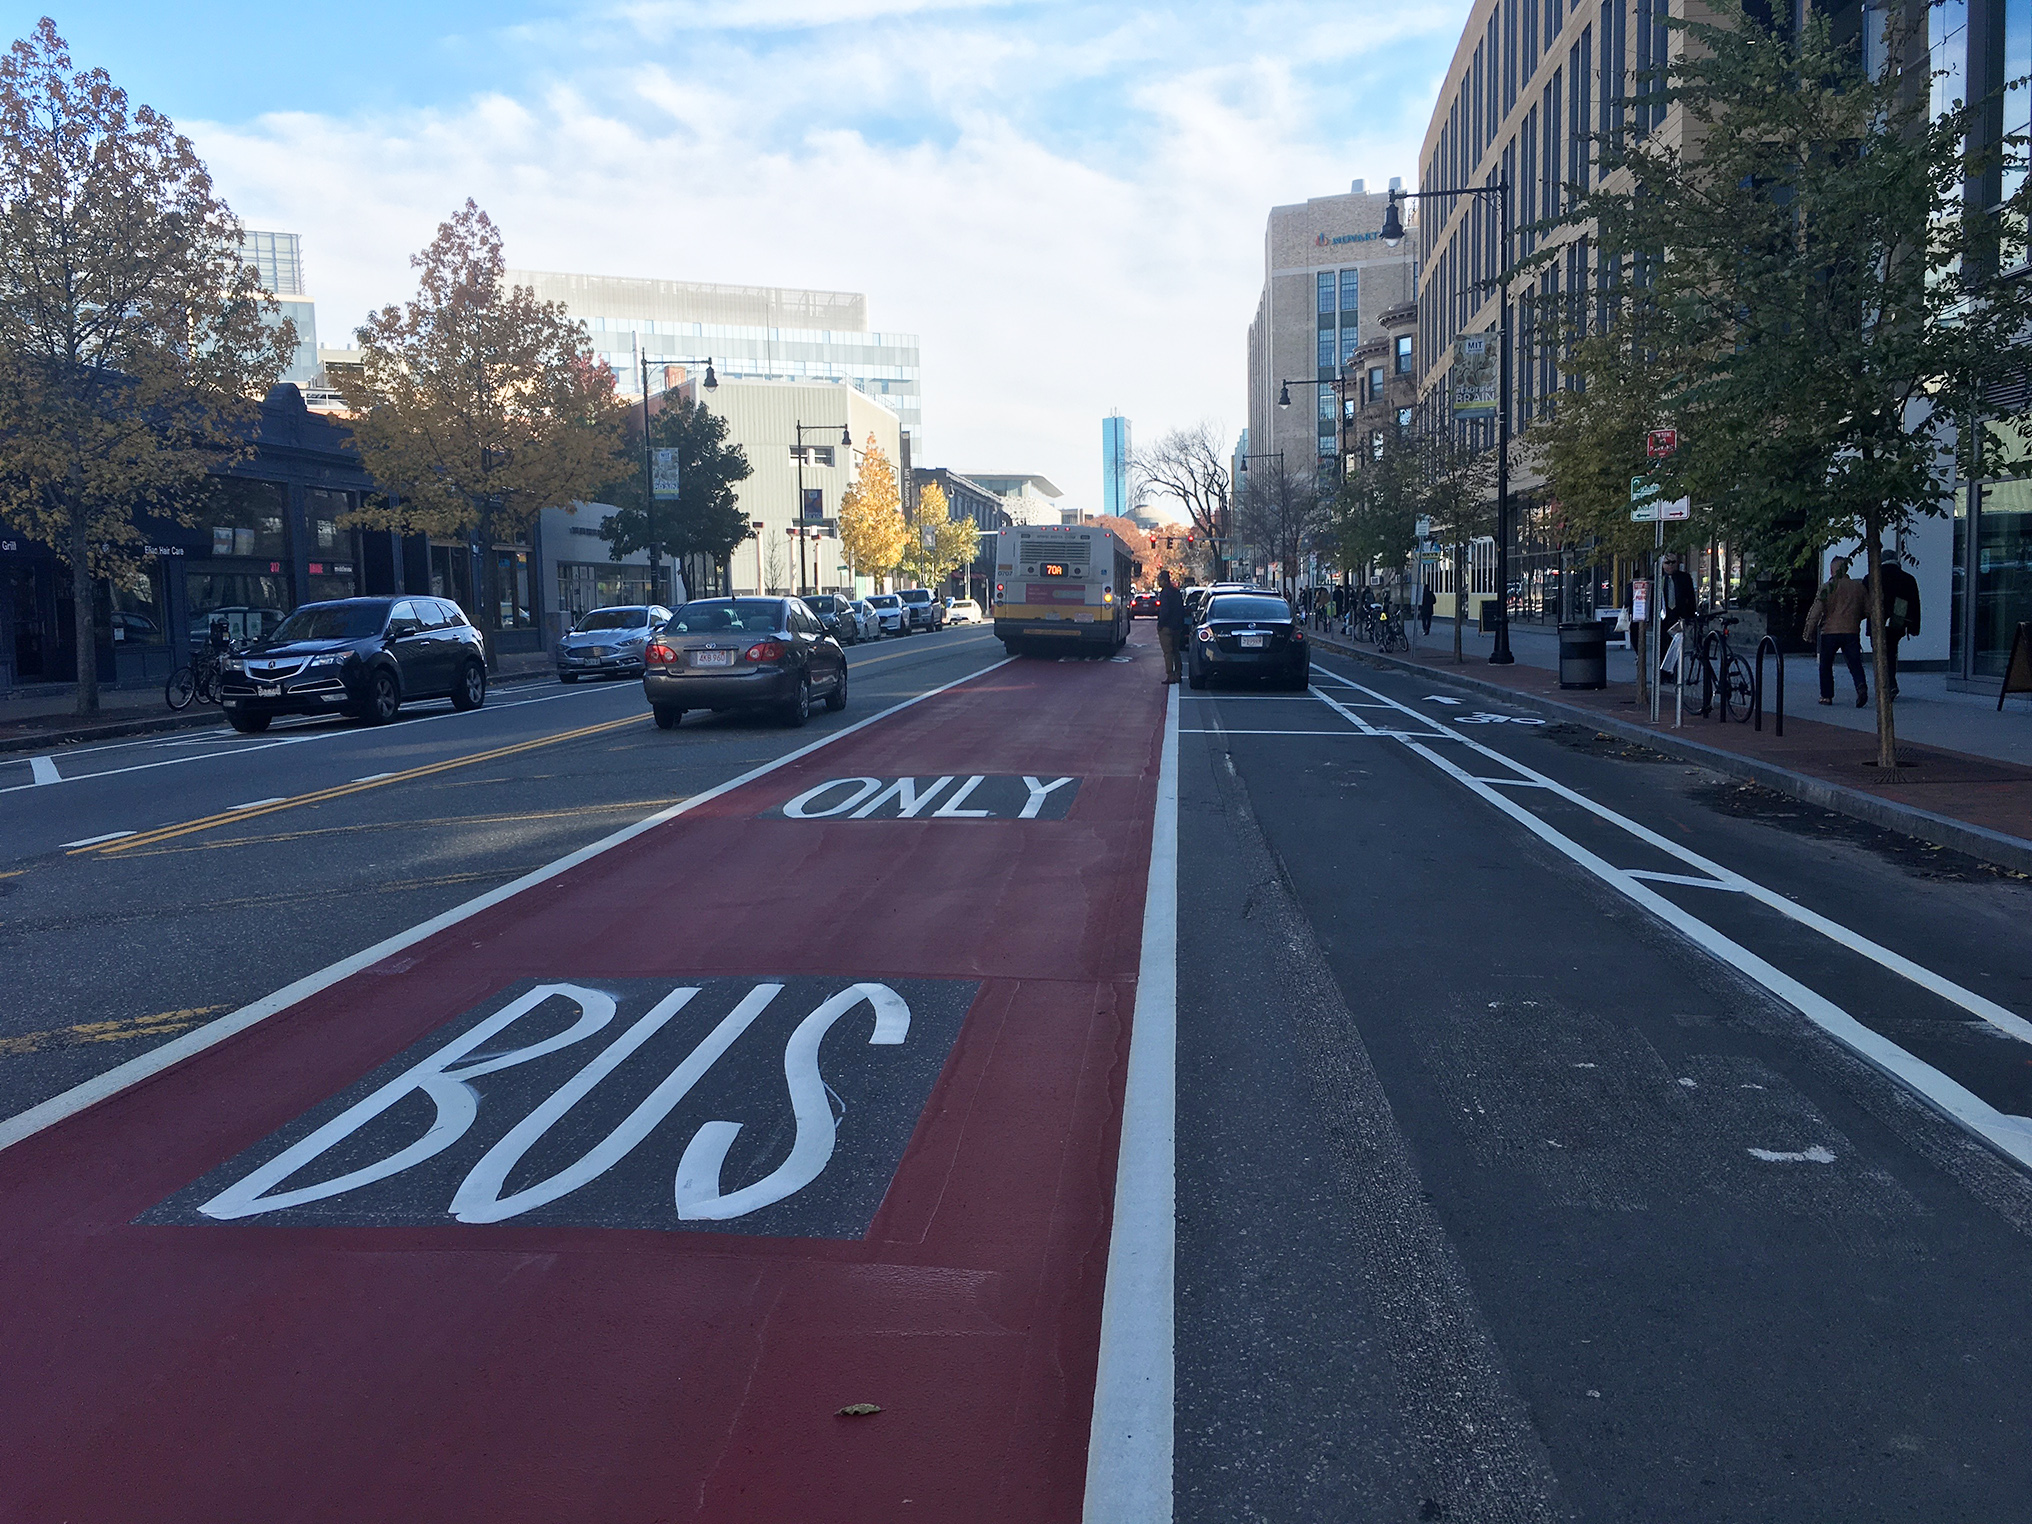 Rules of the Road - CDD - City of Cambridge, Massachusetts